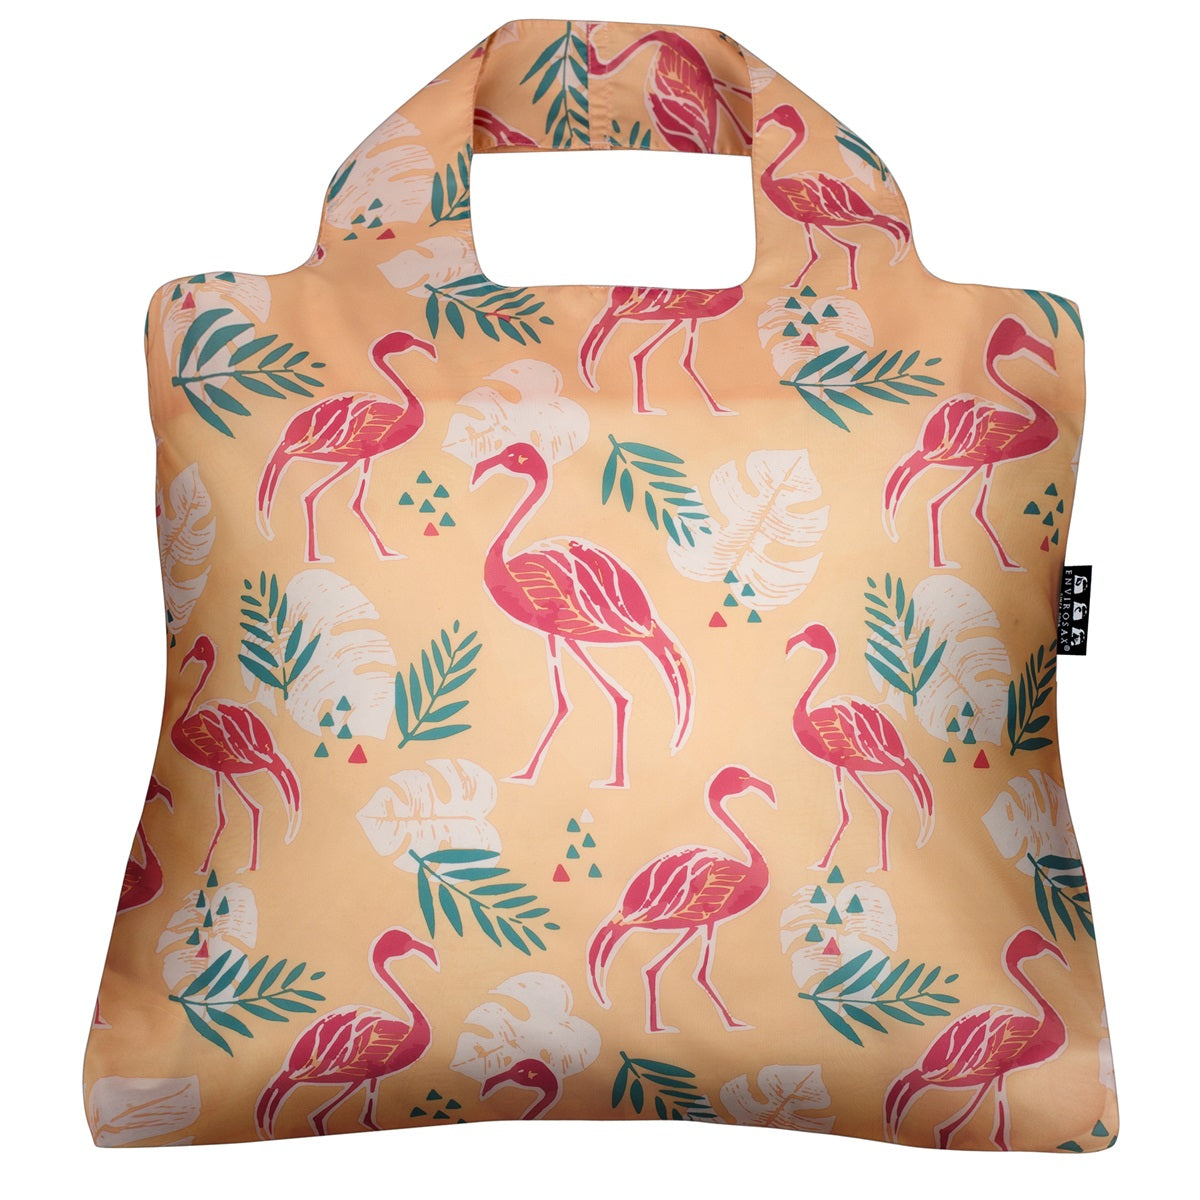 Envirosax Palm Springs Reusable Shopping Grocery Bag, One Size